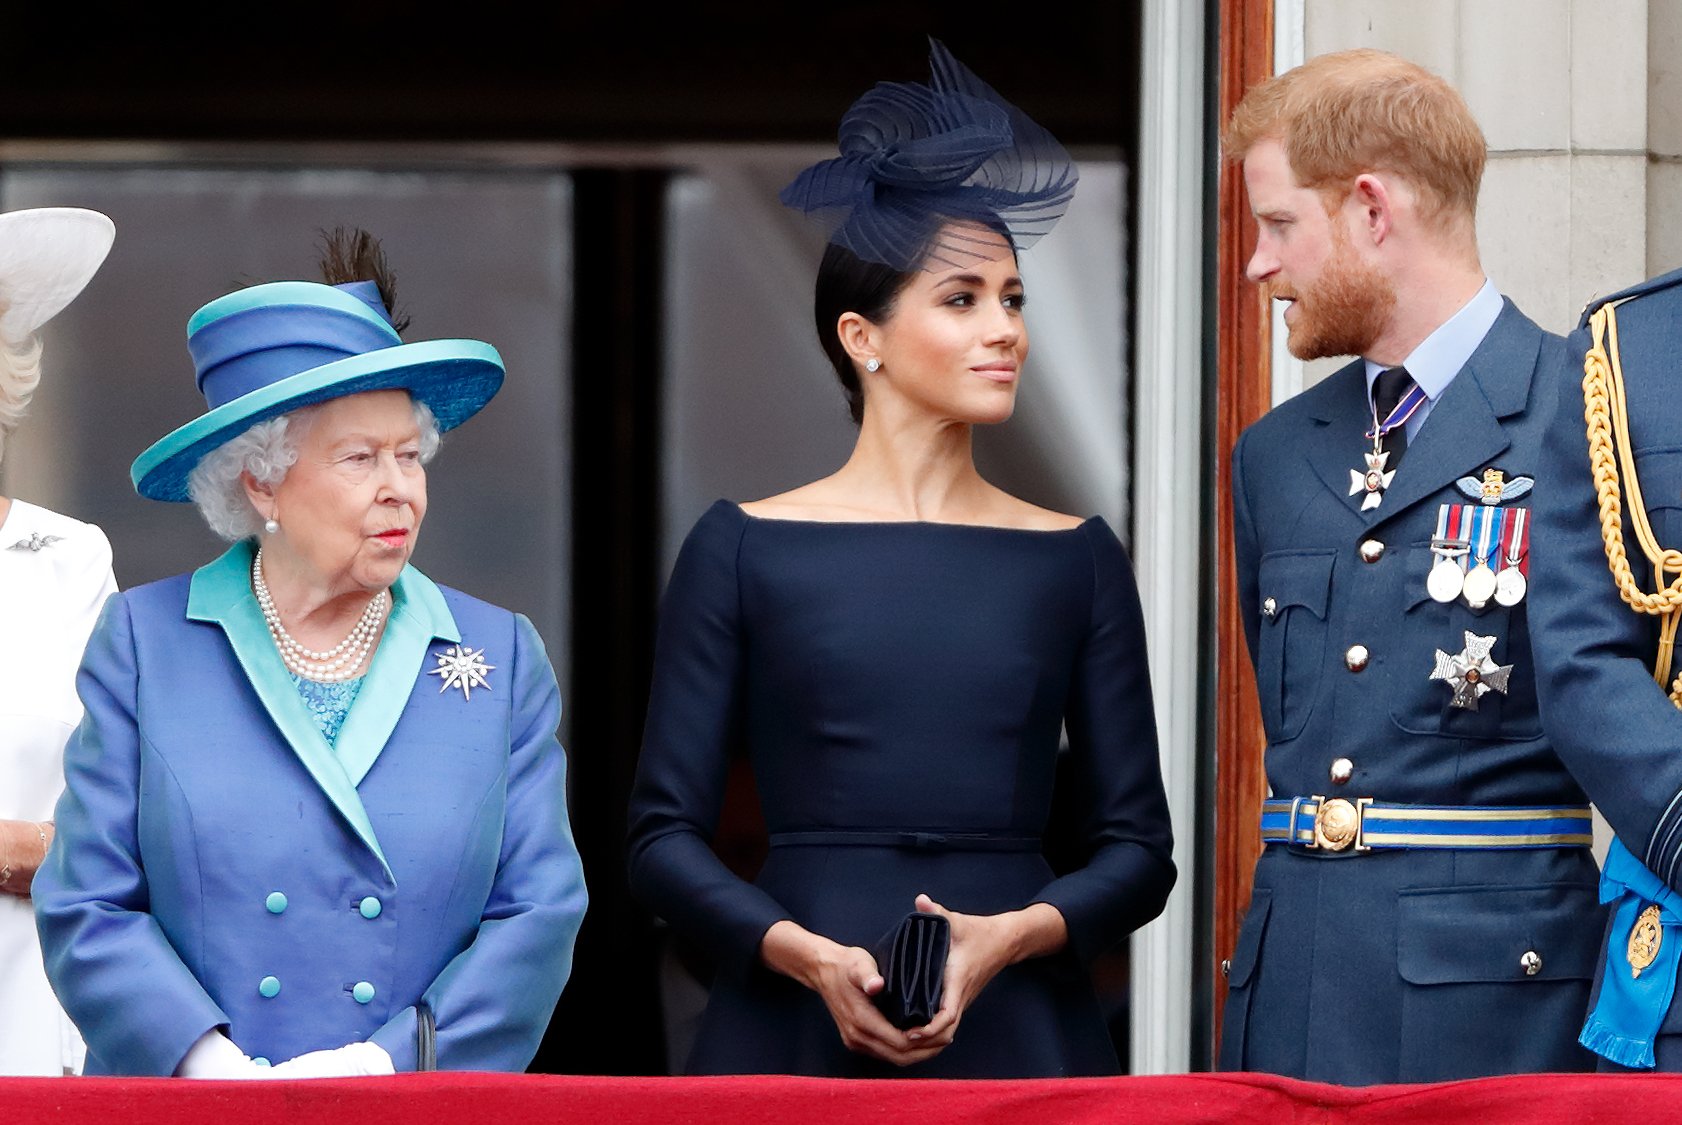 Queen Elizabeth II, Meghan Markle and Prince Harry watching a flypast to mark the centenary of the Royal Air Force from the balcony of Buckingham Palace on July 10, 2018 in London, England. / Source: Getty Images